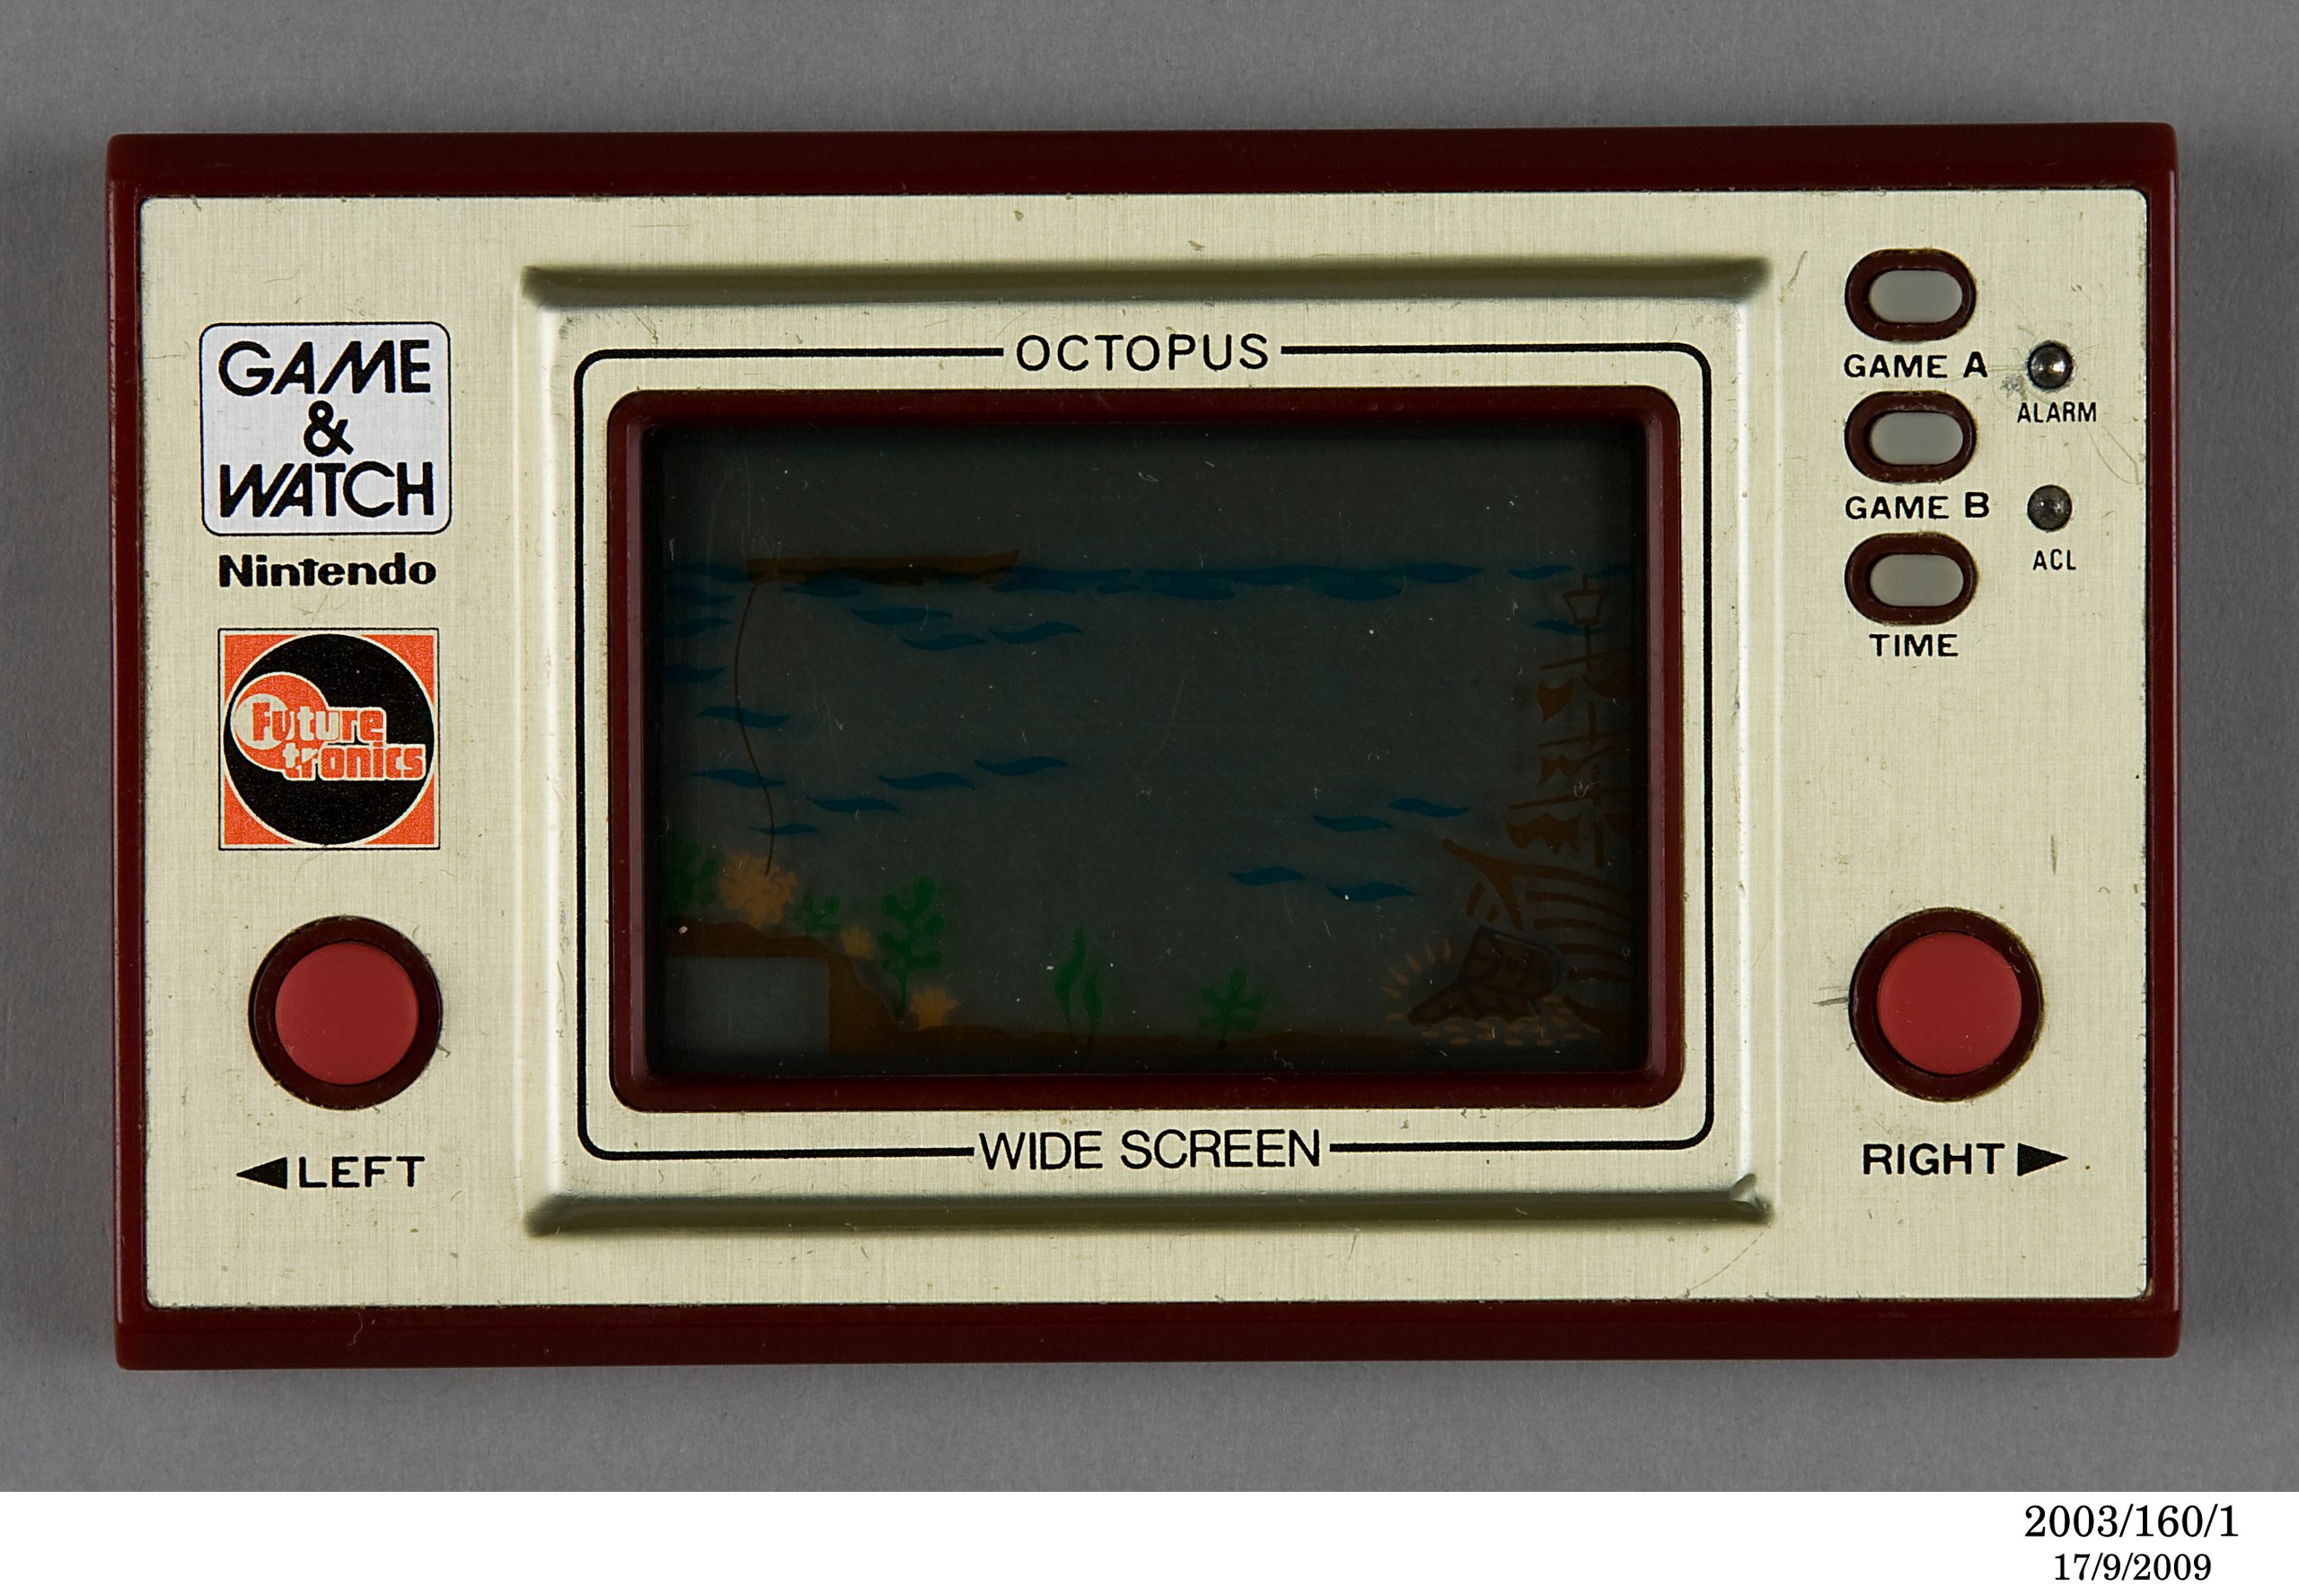 Octopus Game & Watch by Nintendo